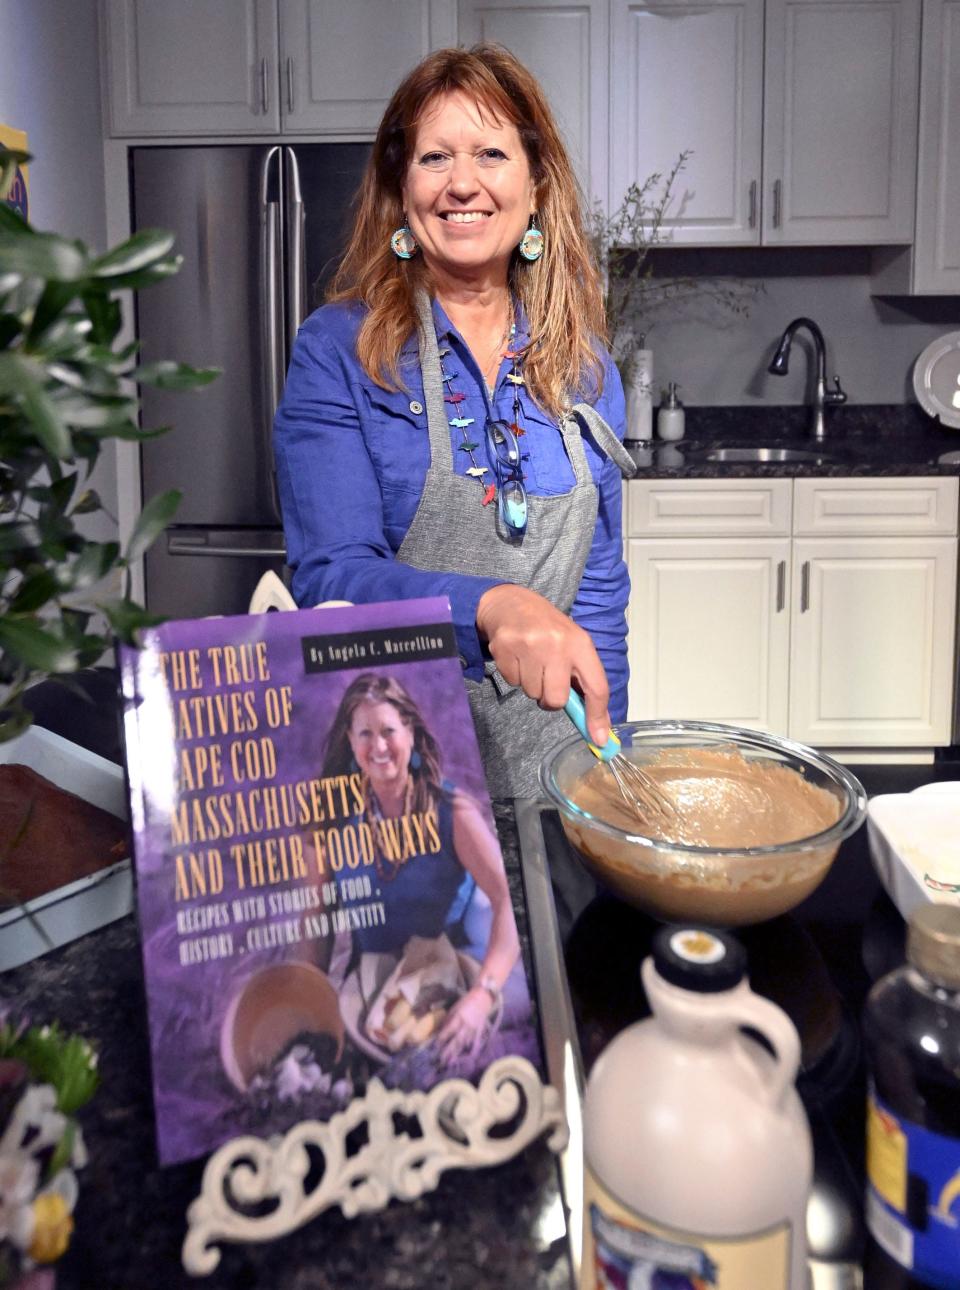 Mashpee Wampanoag Tribe member and author Angela Marcellino prepares an Indian pudding as part of her cooking demonstration on Tuesday at Falmouth Community Television.